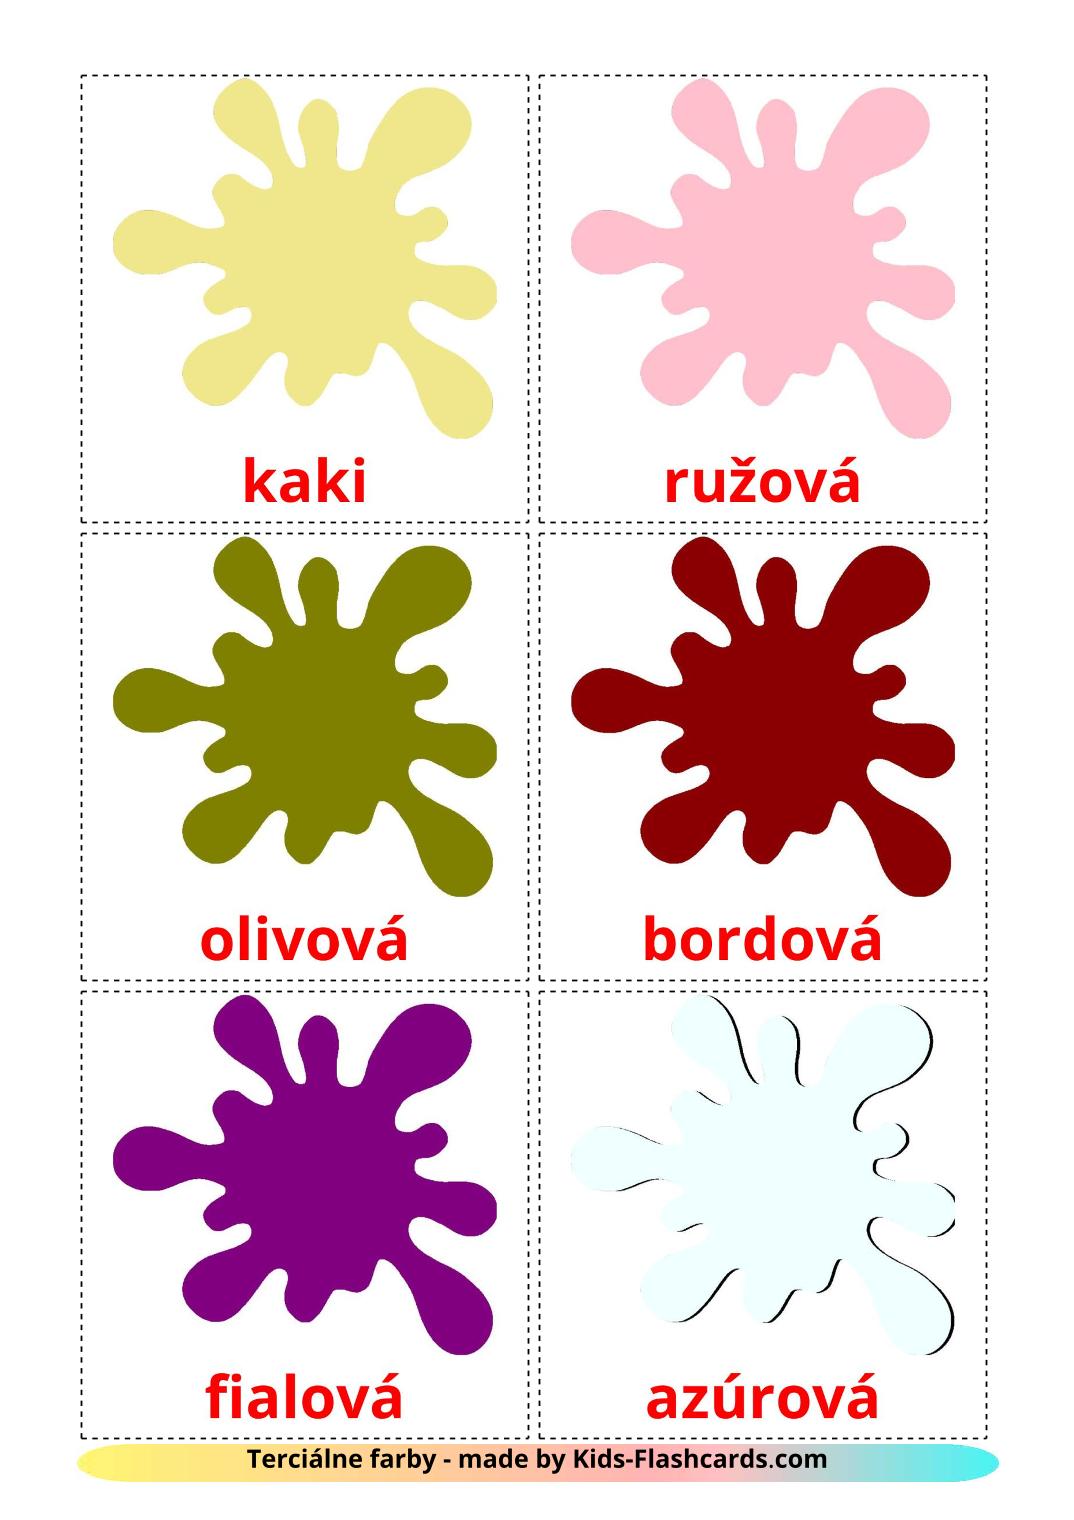 Secondary colors - 20 Free Printable slovak Flashcards 